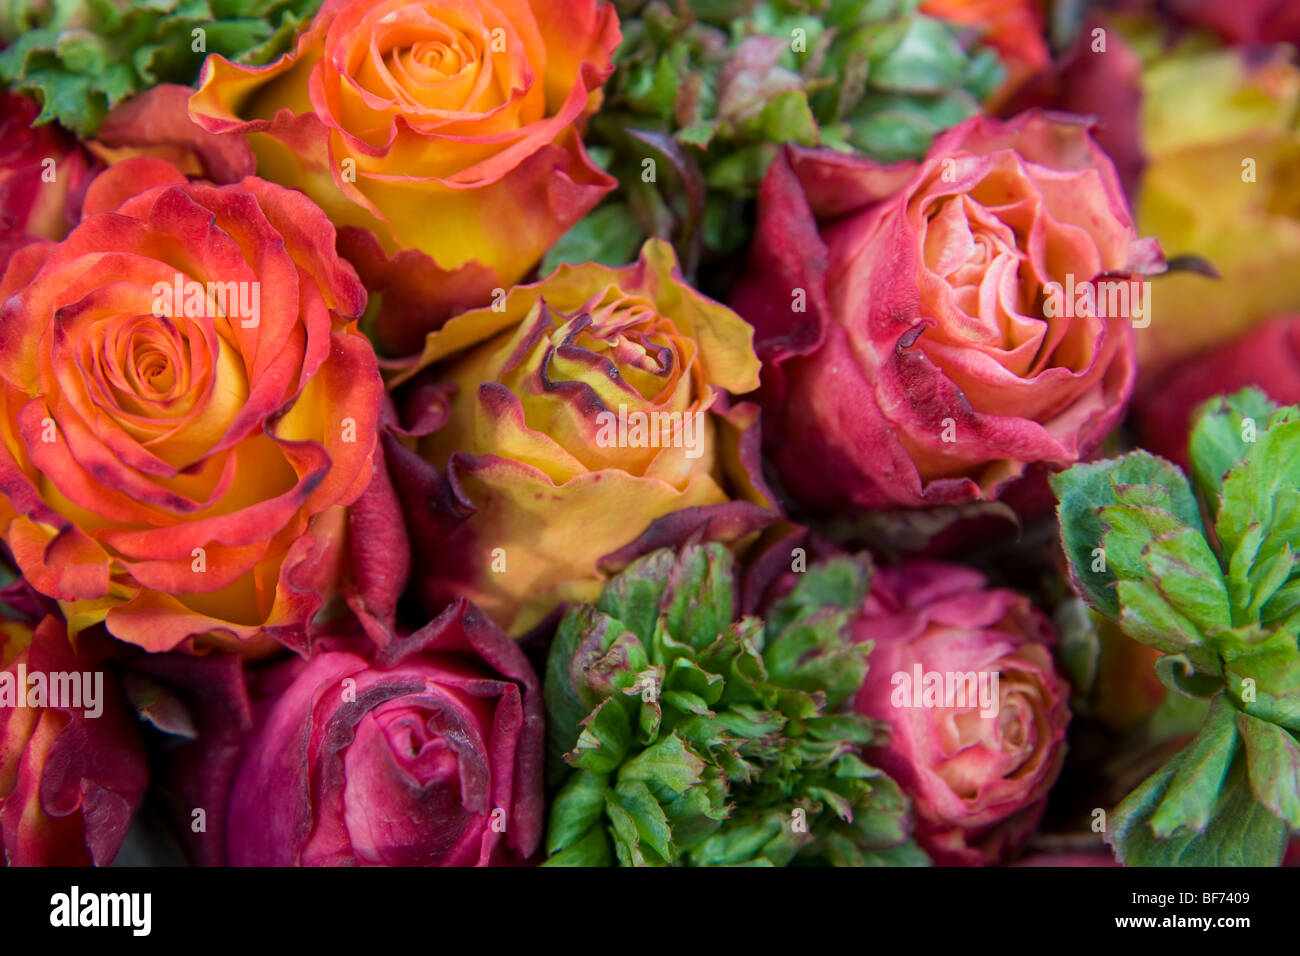 Bouquet of roses field grown at the market in Heidelberg, Baden-Wurttemberg, Germany Stock Photo